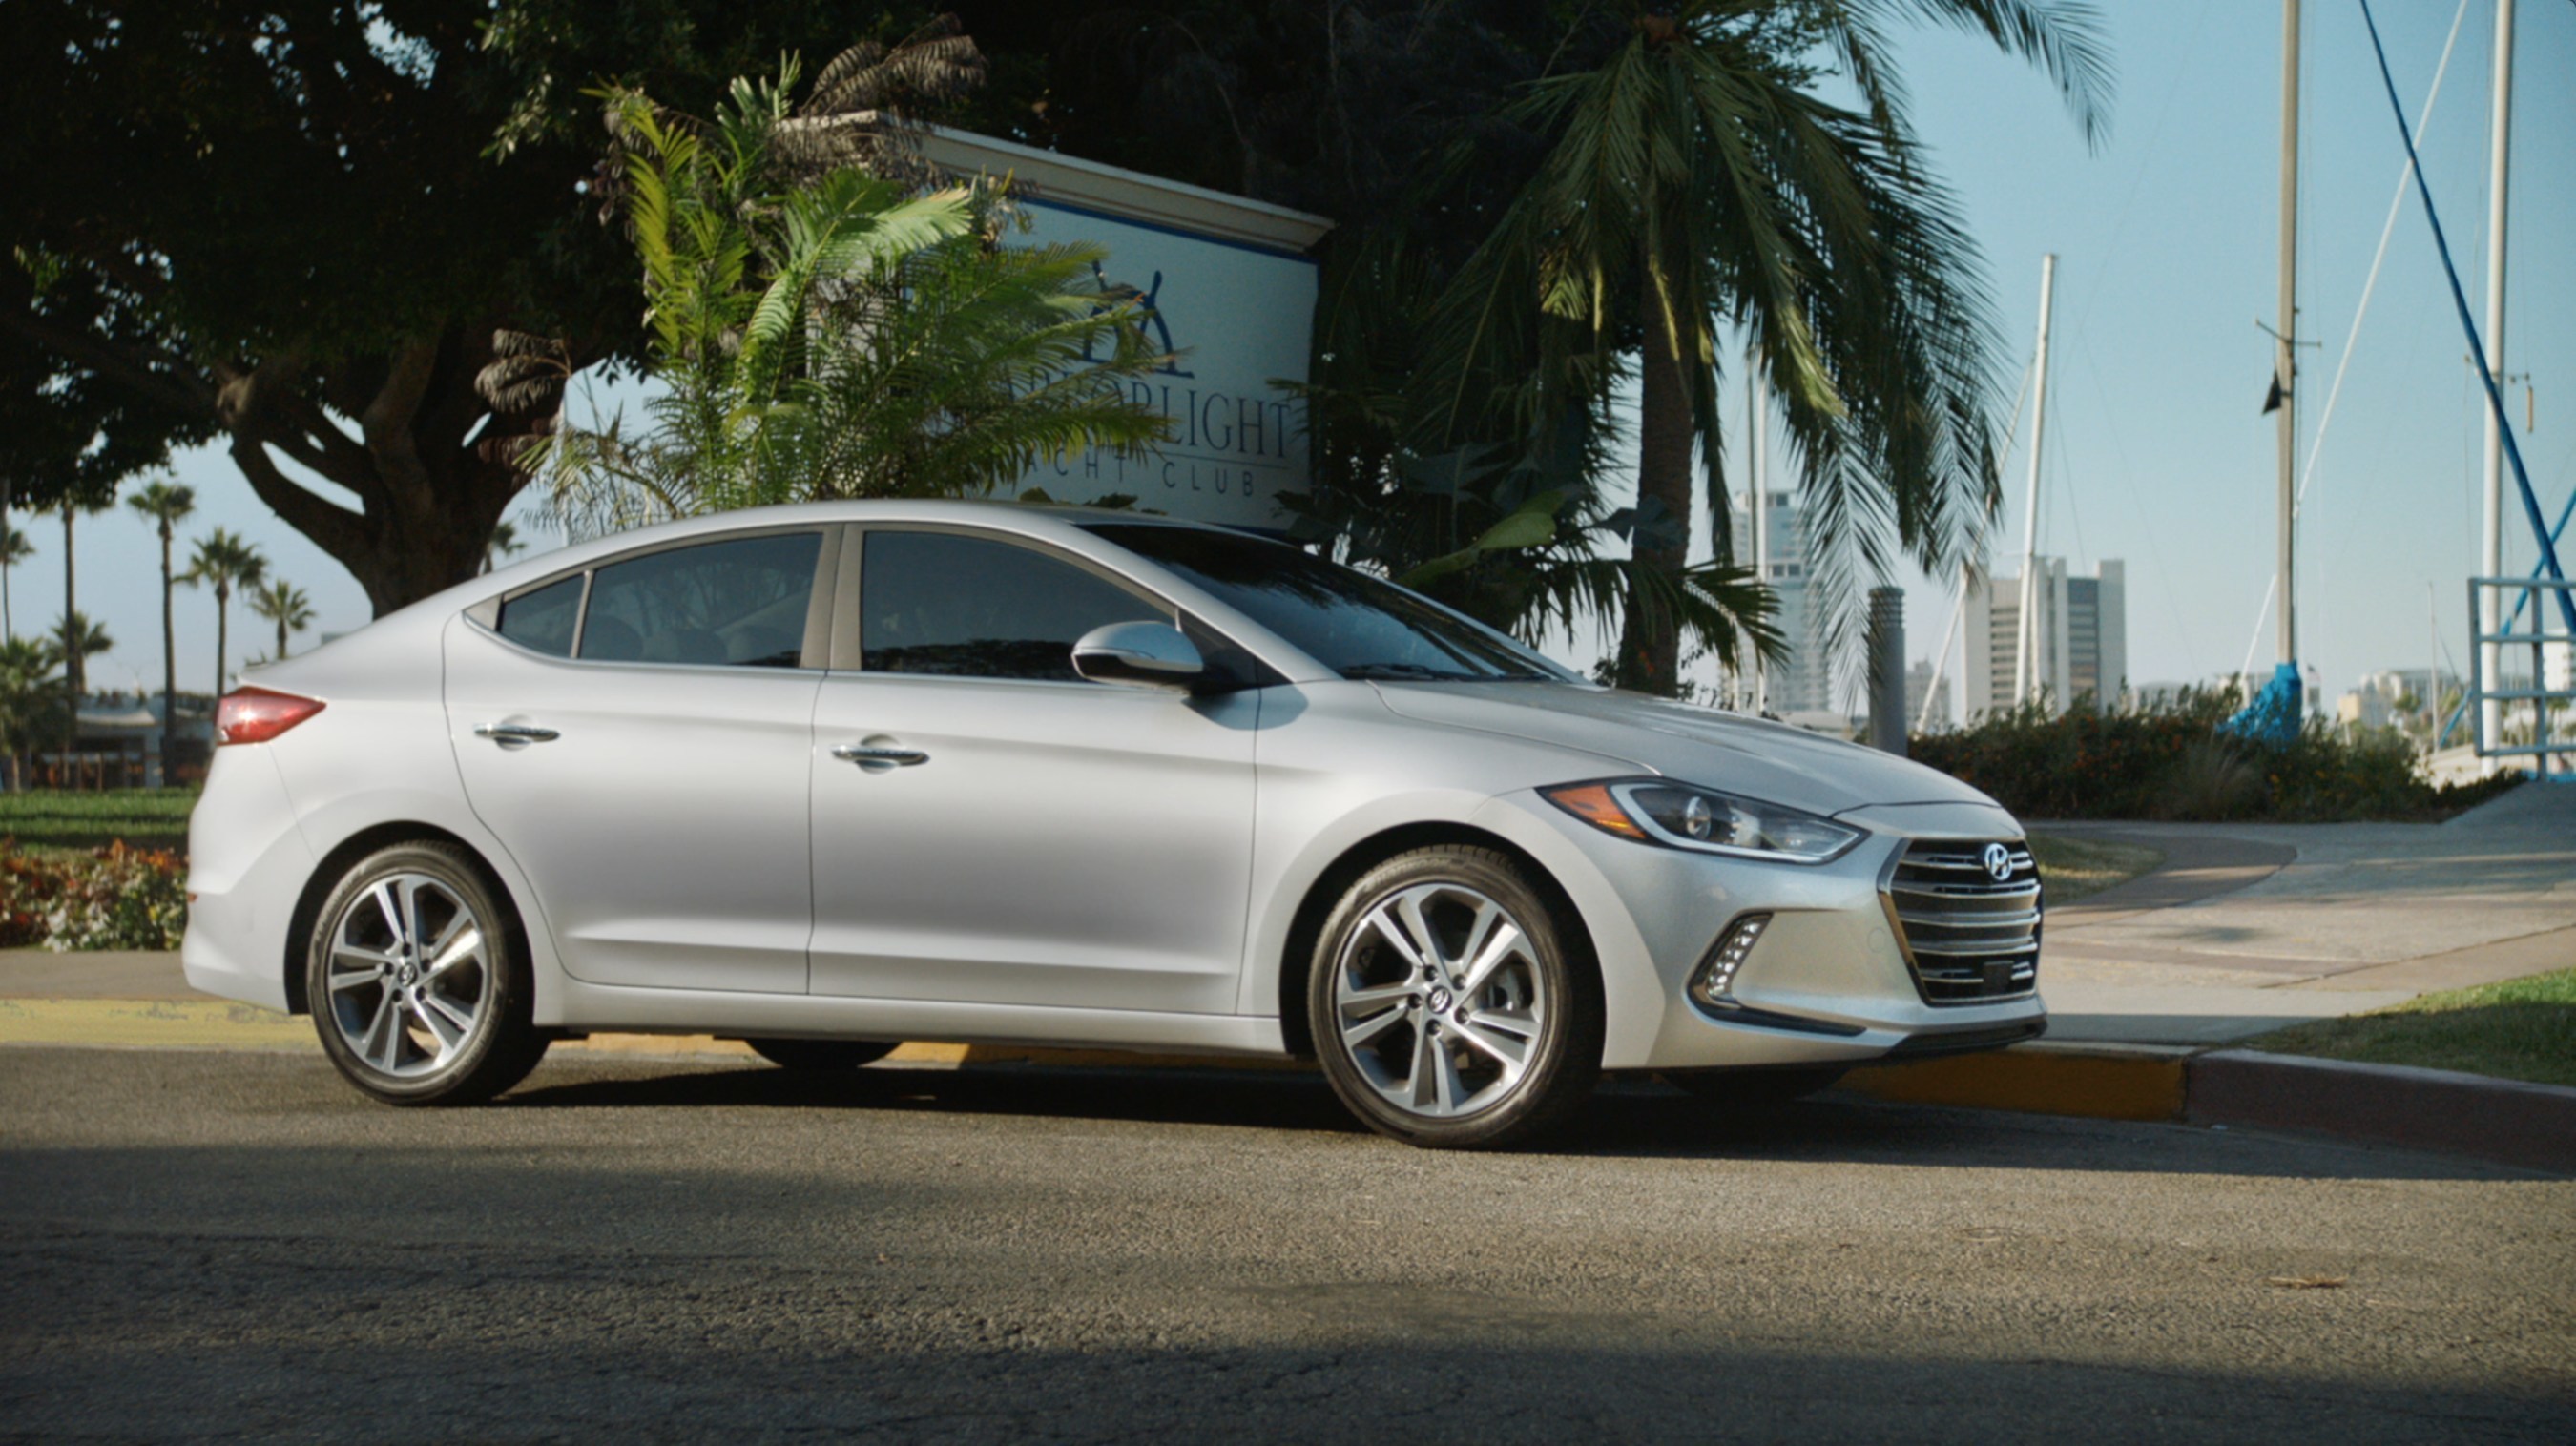 Hyundai's "Fishing Trip" 30-second NFL spot shows how football fans express their loyalty in all sorts of ways and how one Elantra owner shows his commitment to his team, the Miami Dolphins.